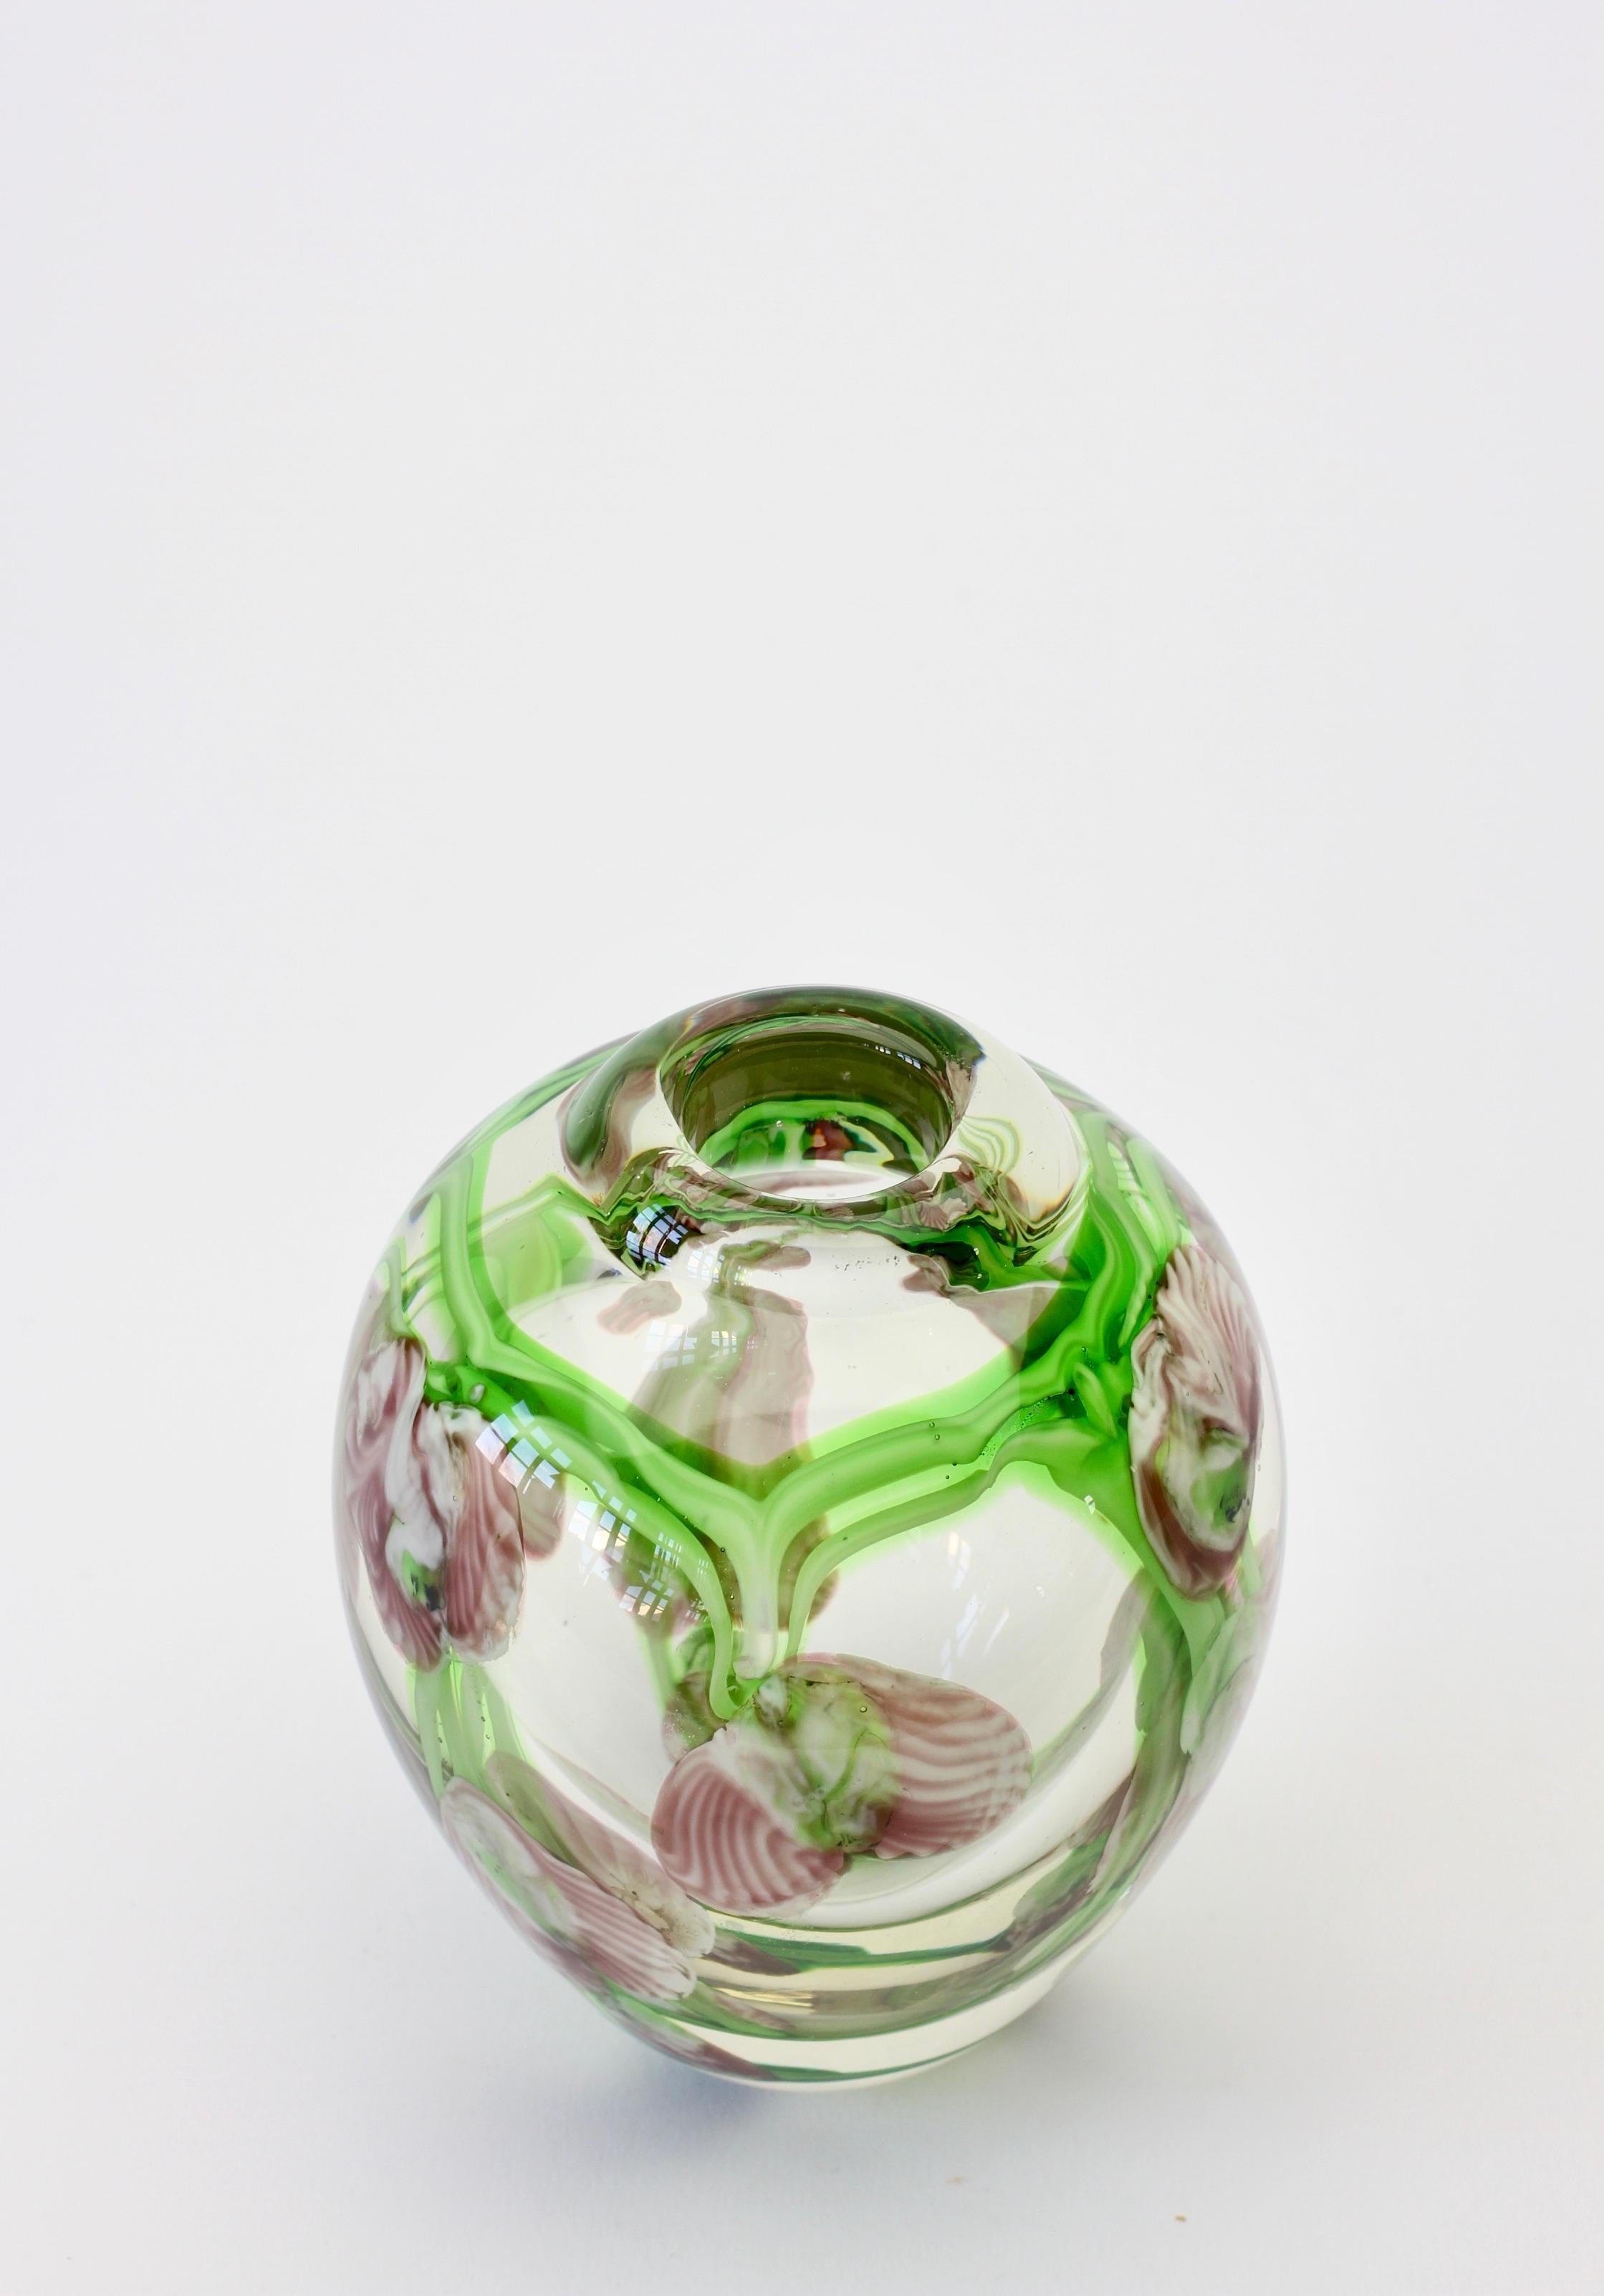 20th Century Decorative Small Glass Vase with Pink and Green Flower Inclusions